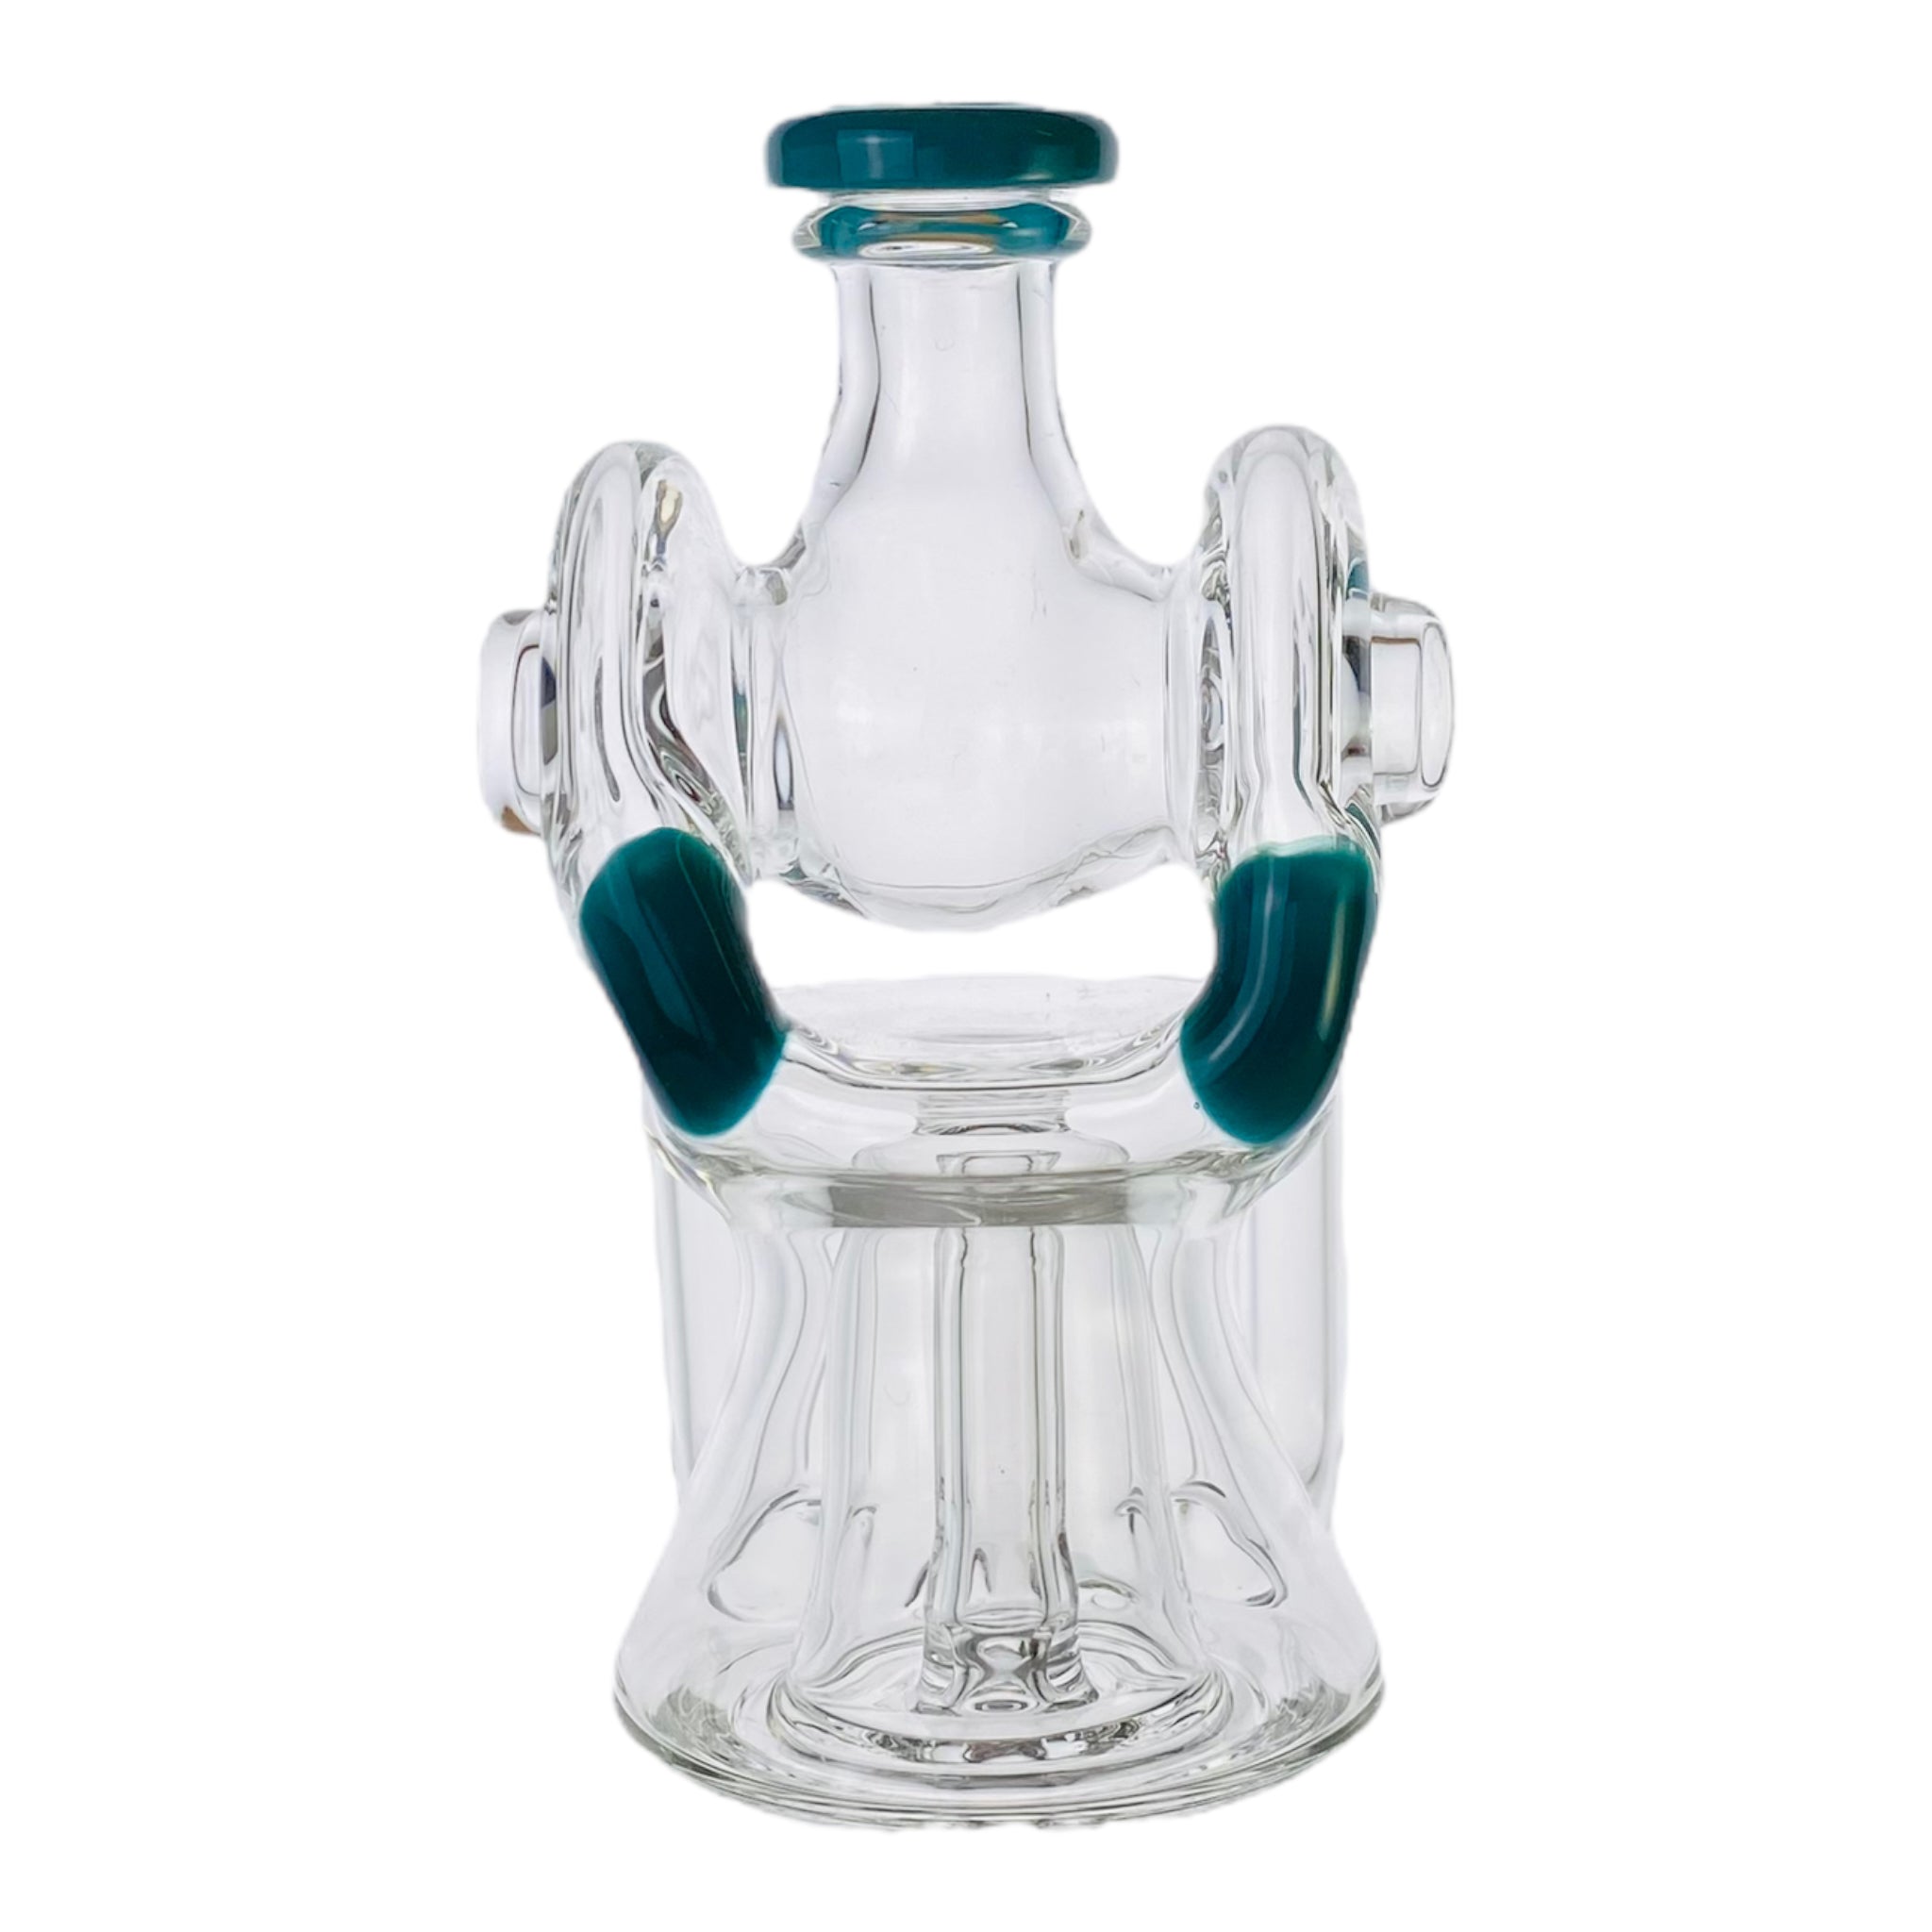 Puffco Peak Pro Colored Replacement Glass (Royal Blue) - Aroma